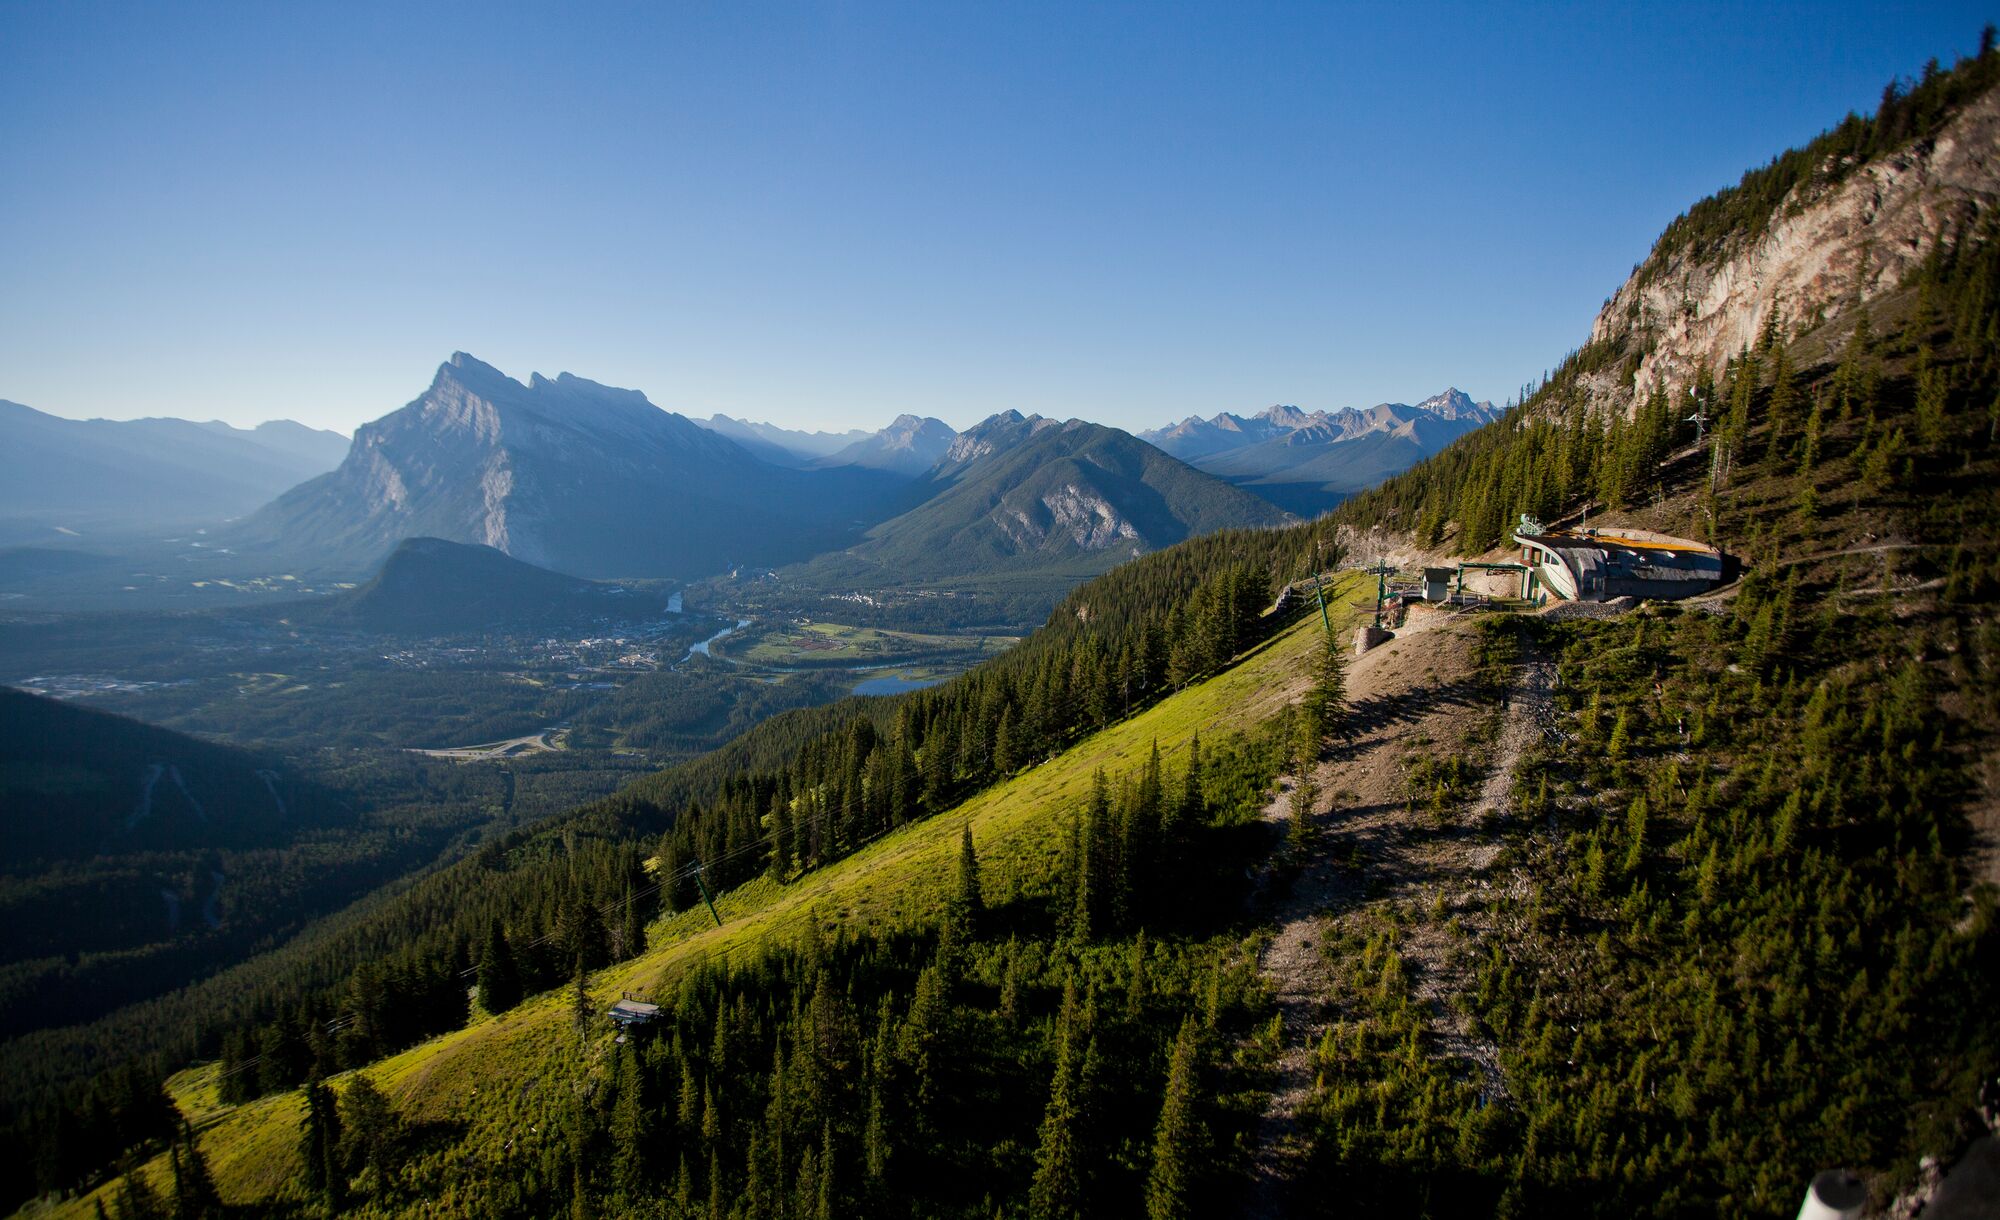 Aerial shot of Cliffhouse Bistro on Mt. Norquay in Banff National Park with Mt. Rundle in the background.